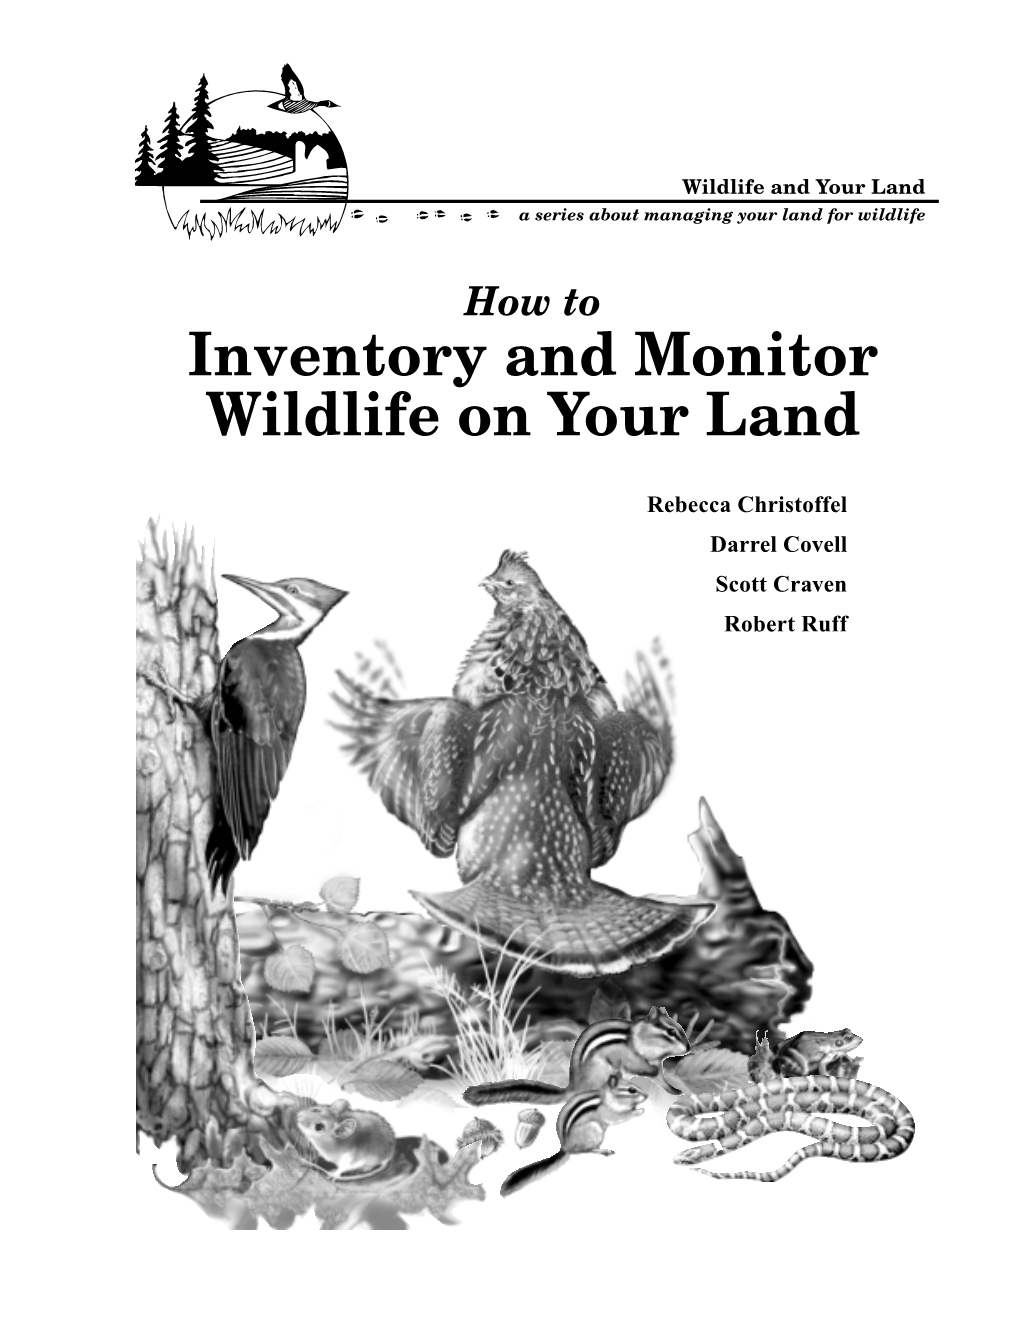 Inventory and Monitor Wildlife on Your Land